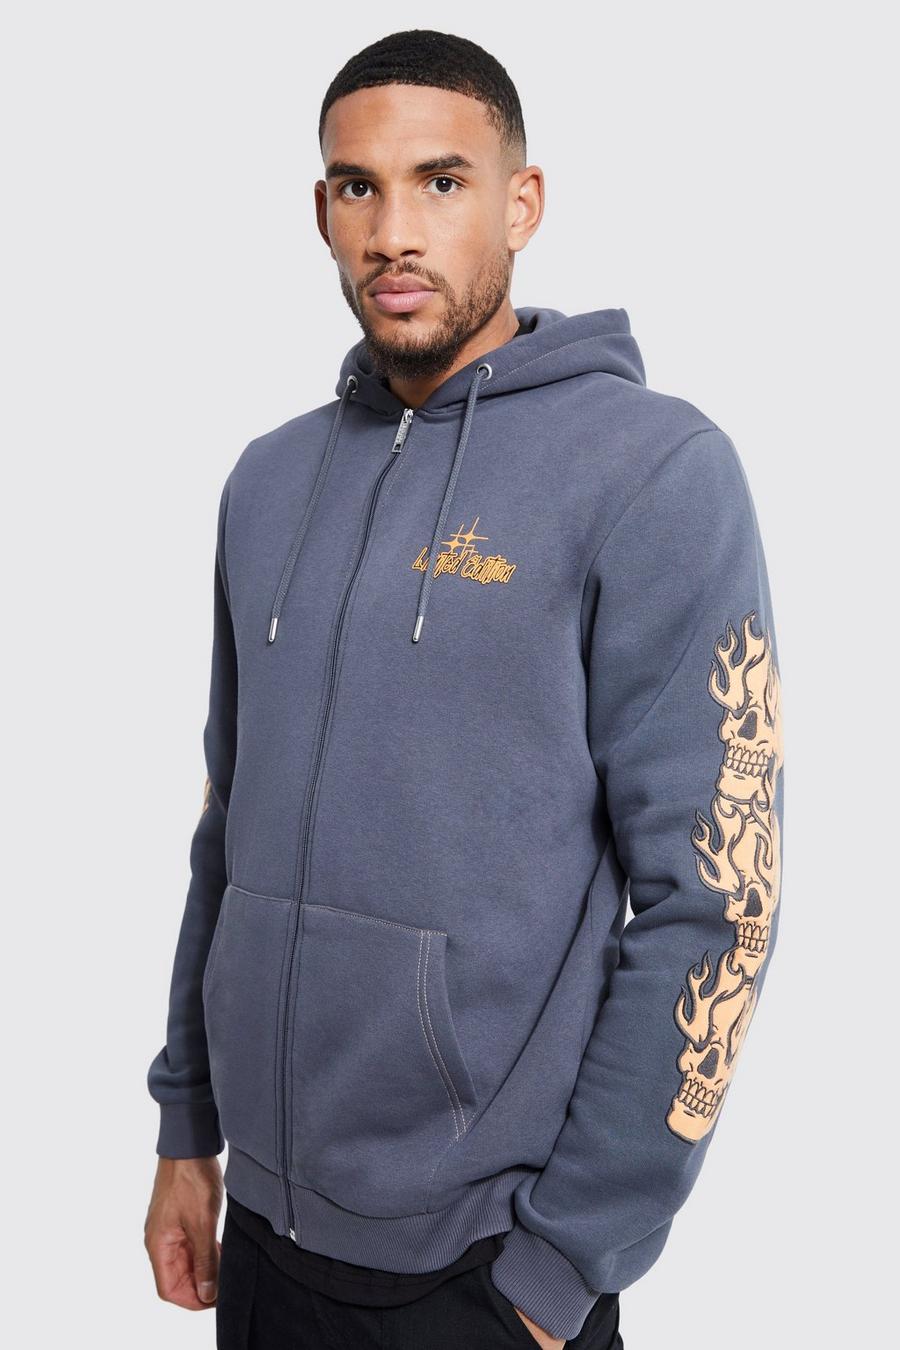 Charcoal grey Tall Zip Through Applique Sleeve Hoodie Contrast Stitch